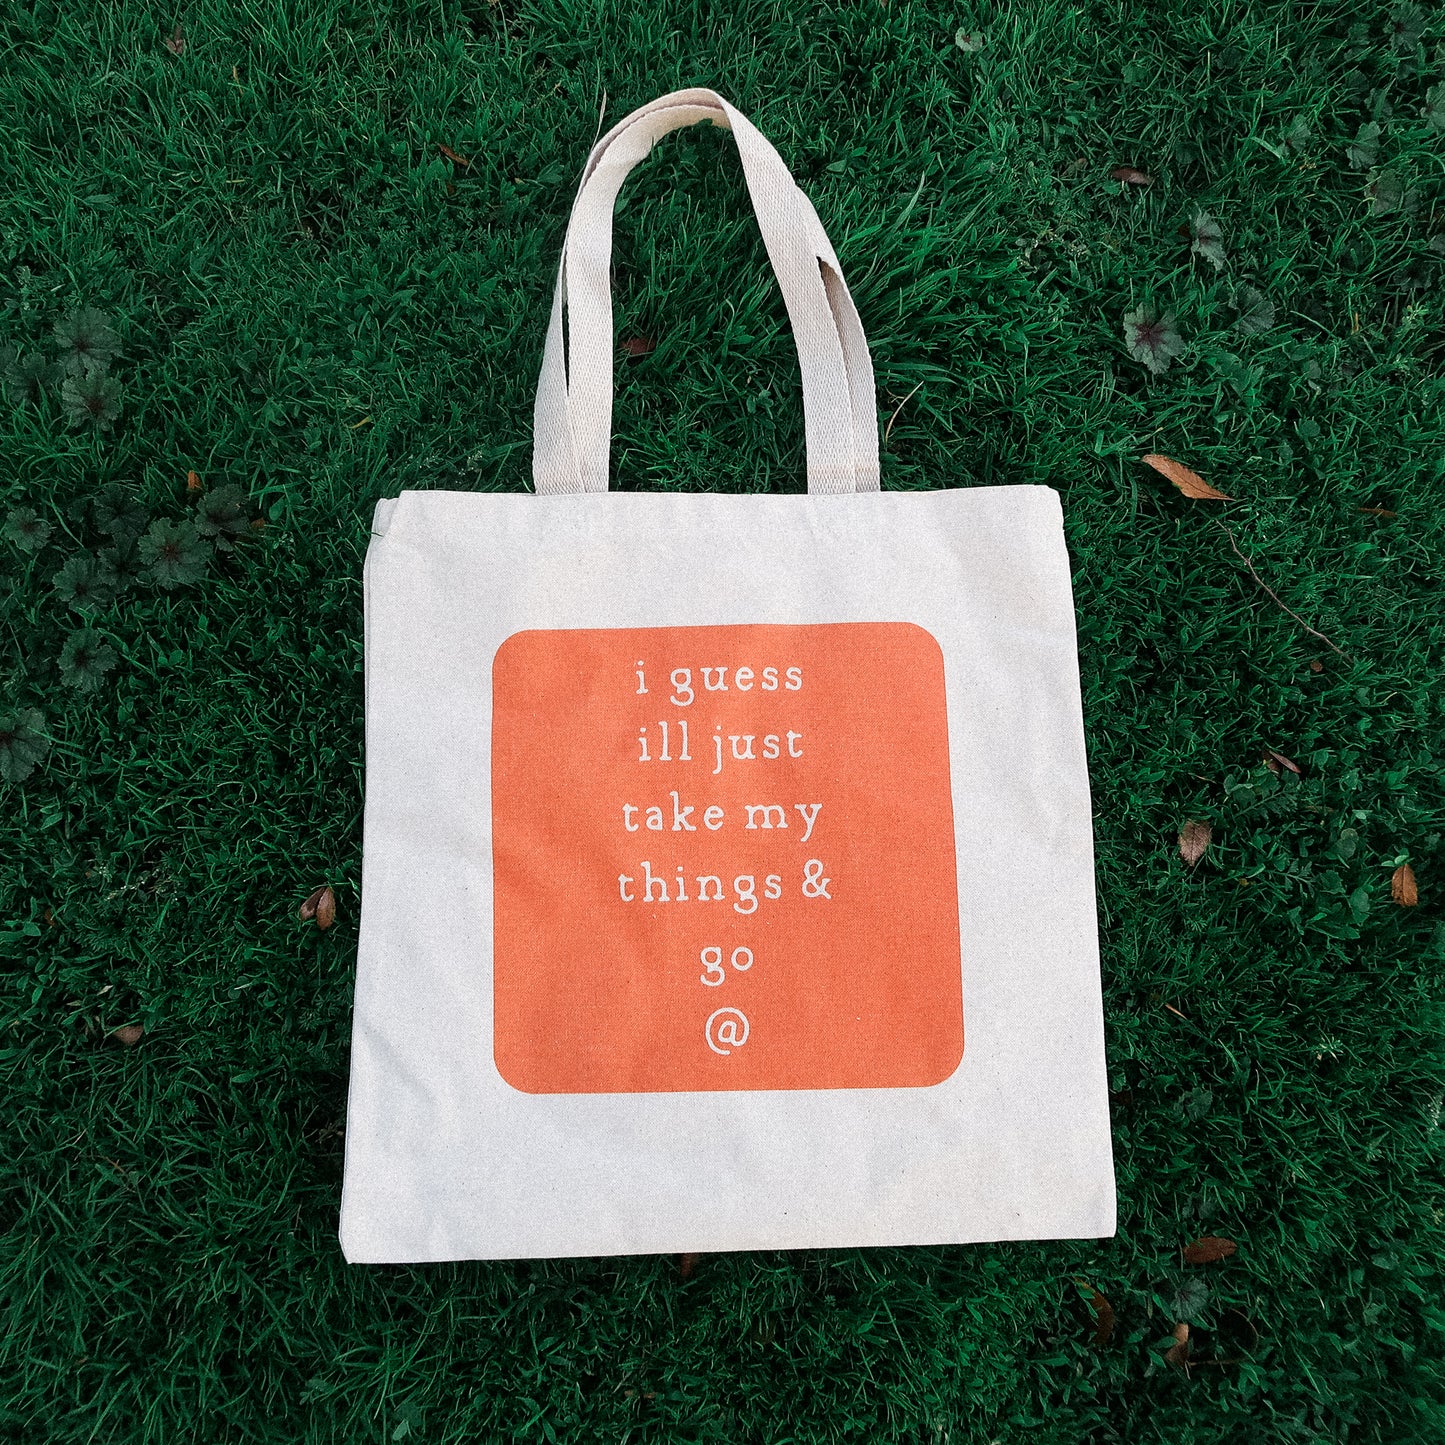 Annie Omalley: take my things & go tote